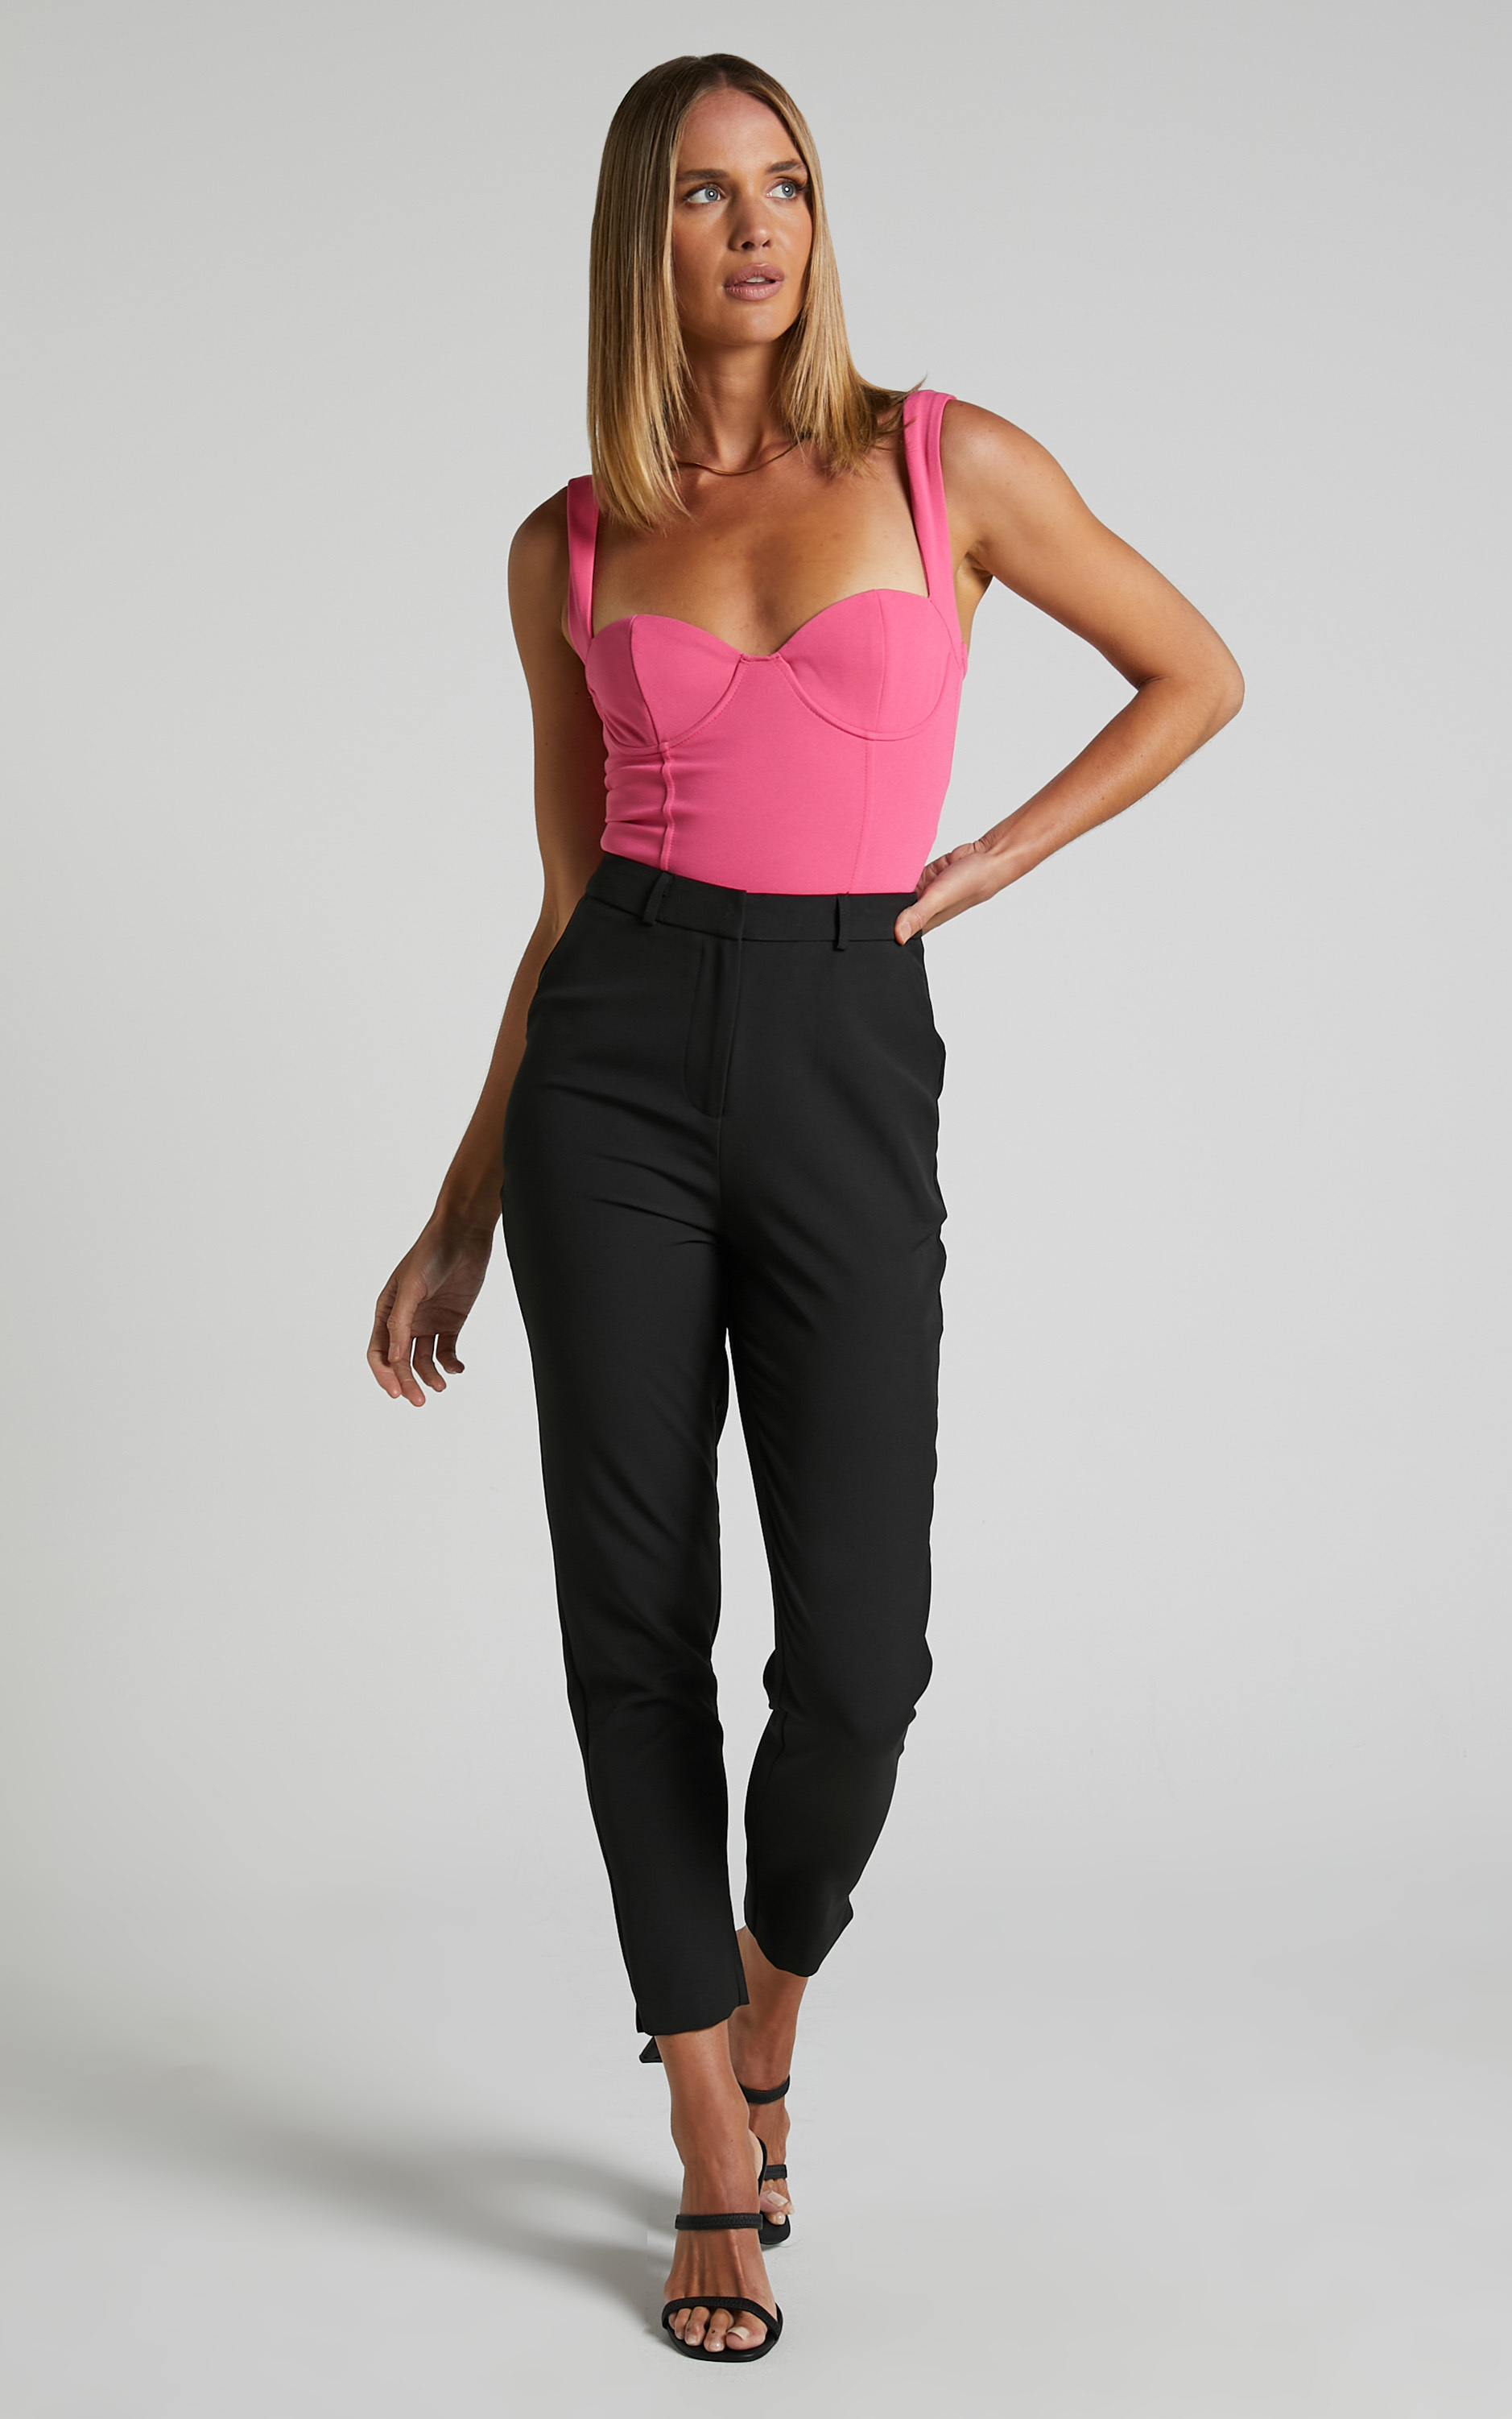 Hermie Pants - Cropped Tailored Pants in Black - 04, BLK1, hi-res image number null